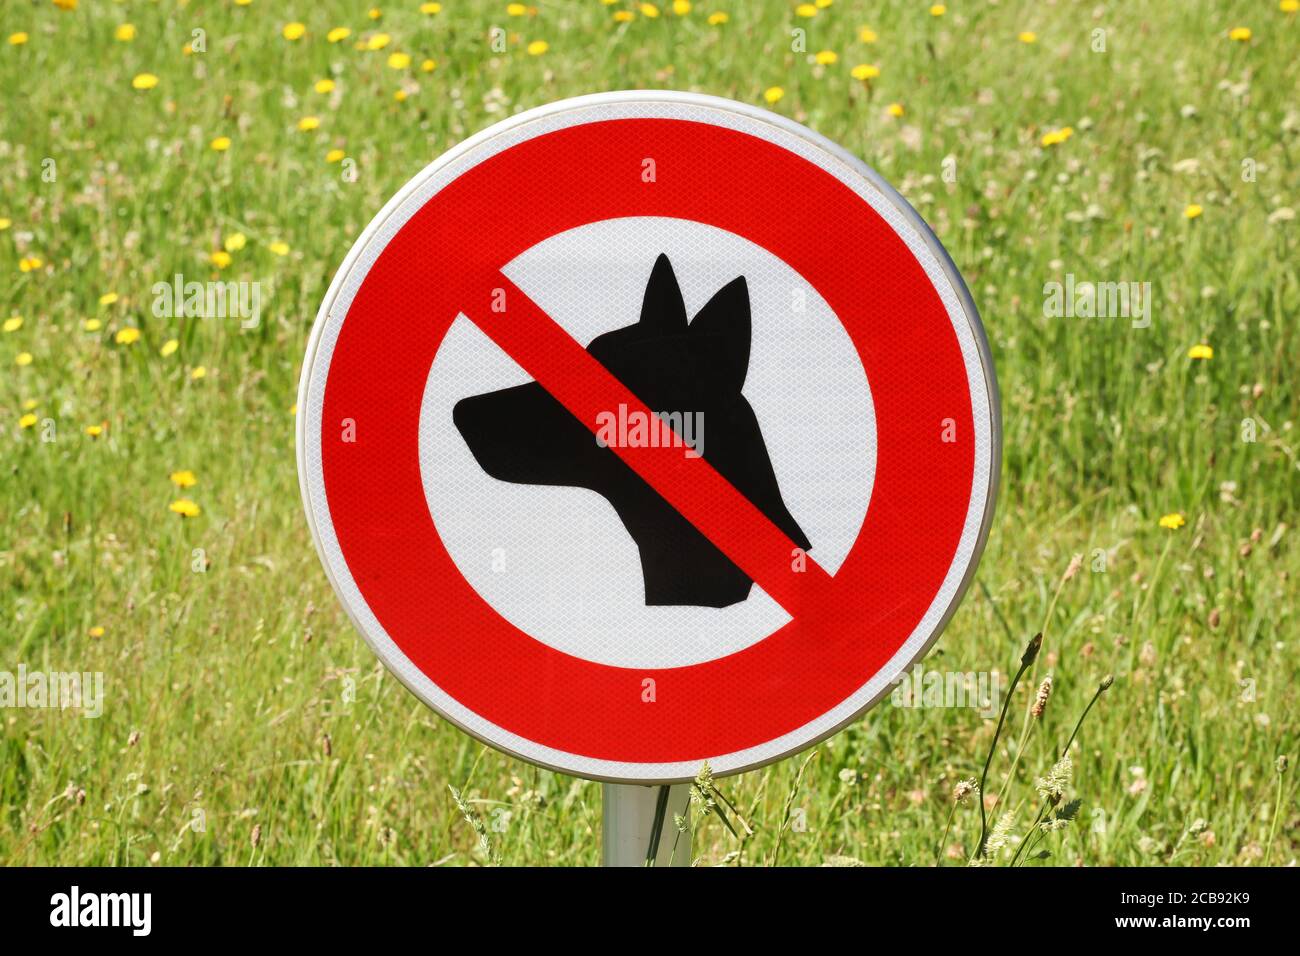 No dogs allowed sign Stock Photo